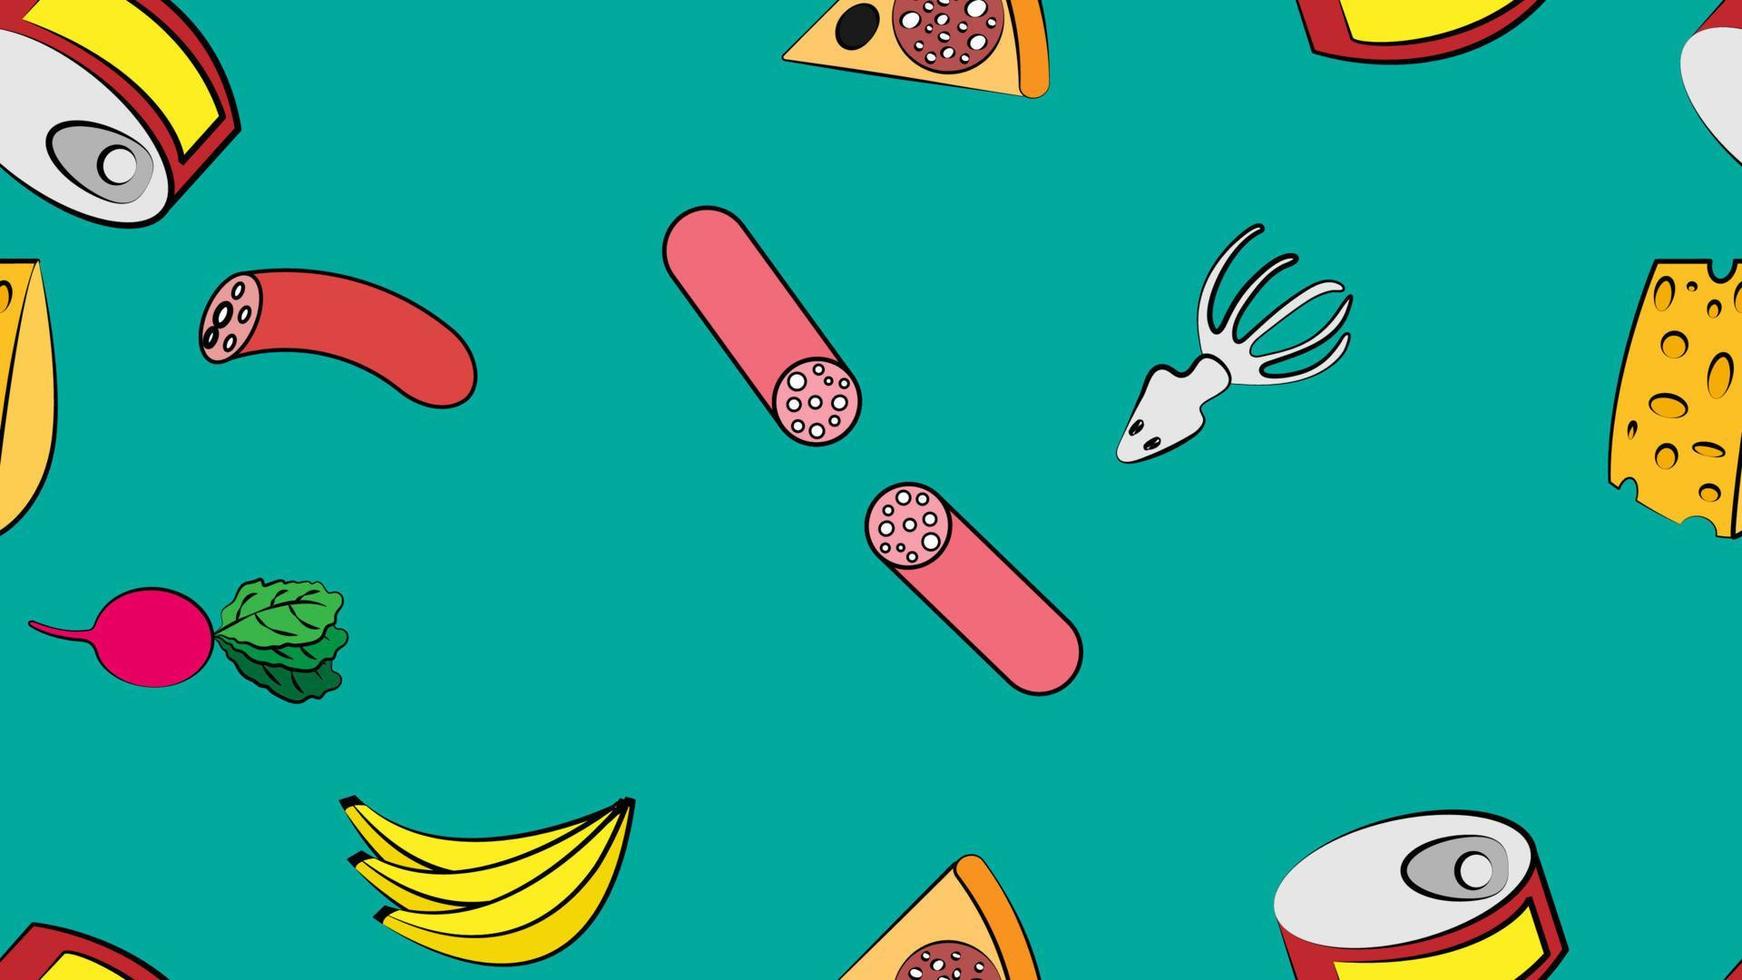 Endless green seamless pattern from a set of icons of delicious food and snacks items for a restaurant bar cafe sausage, bananas, radish, squid, cheese, canned food, pizza. The background vector